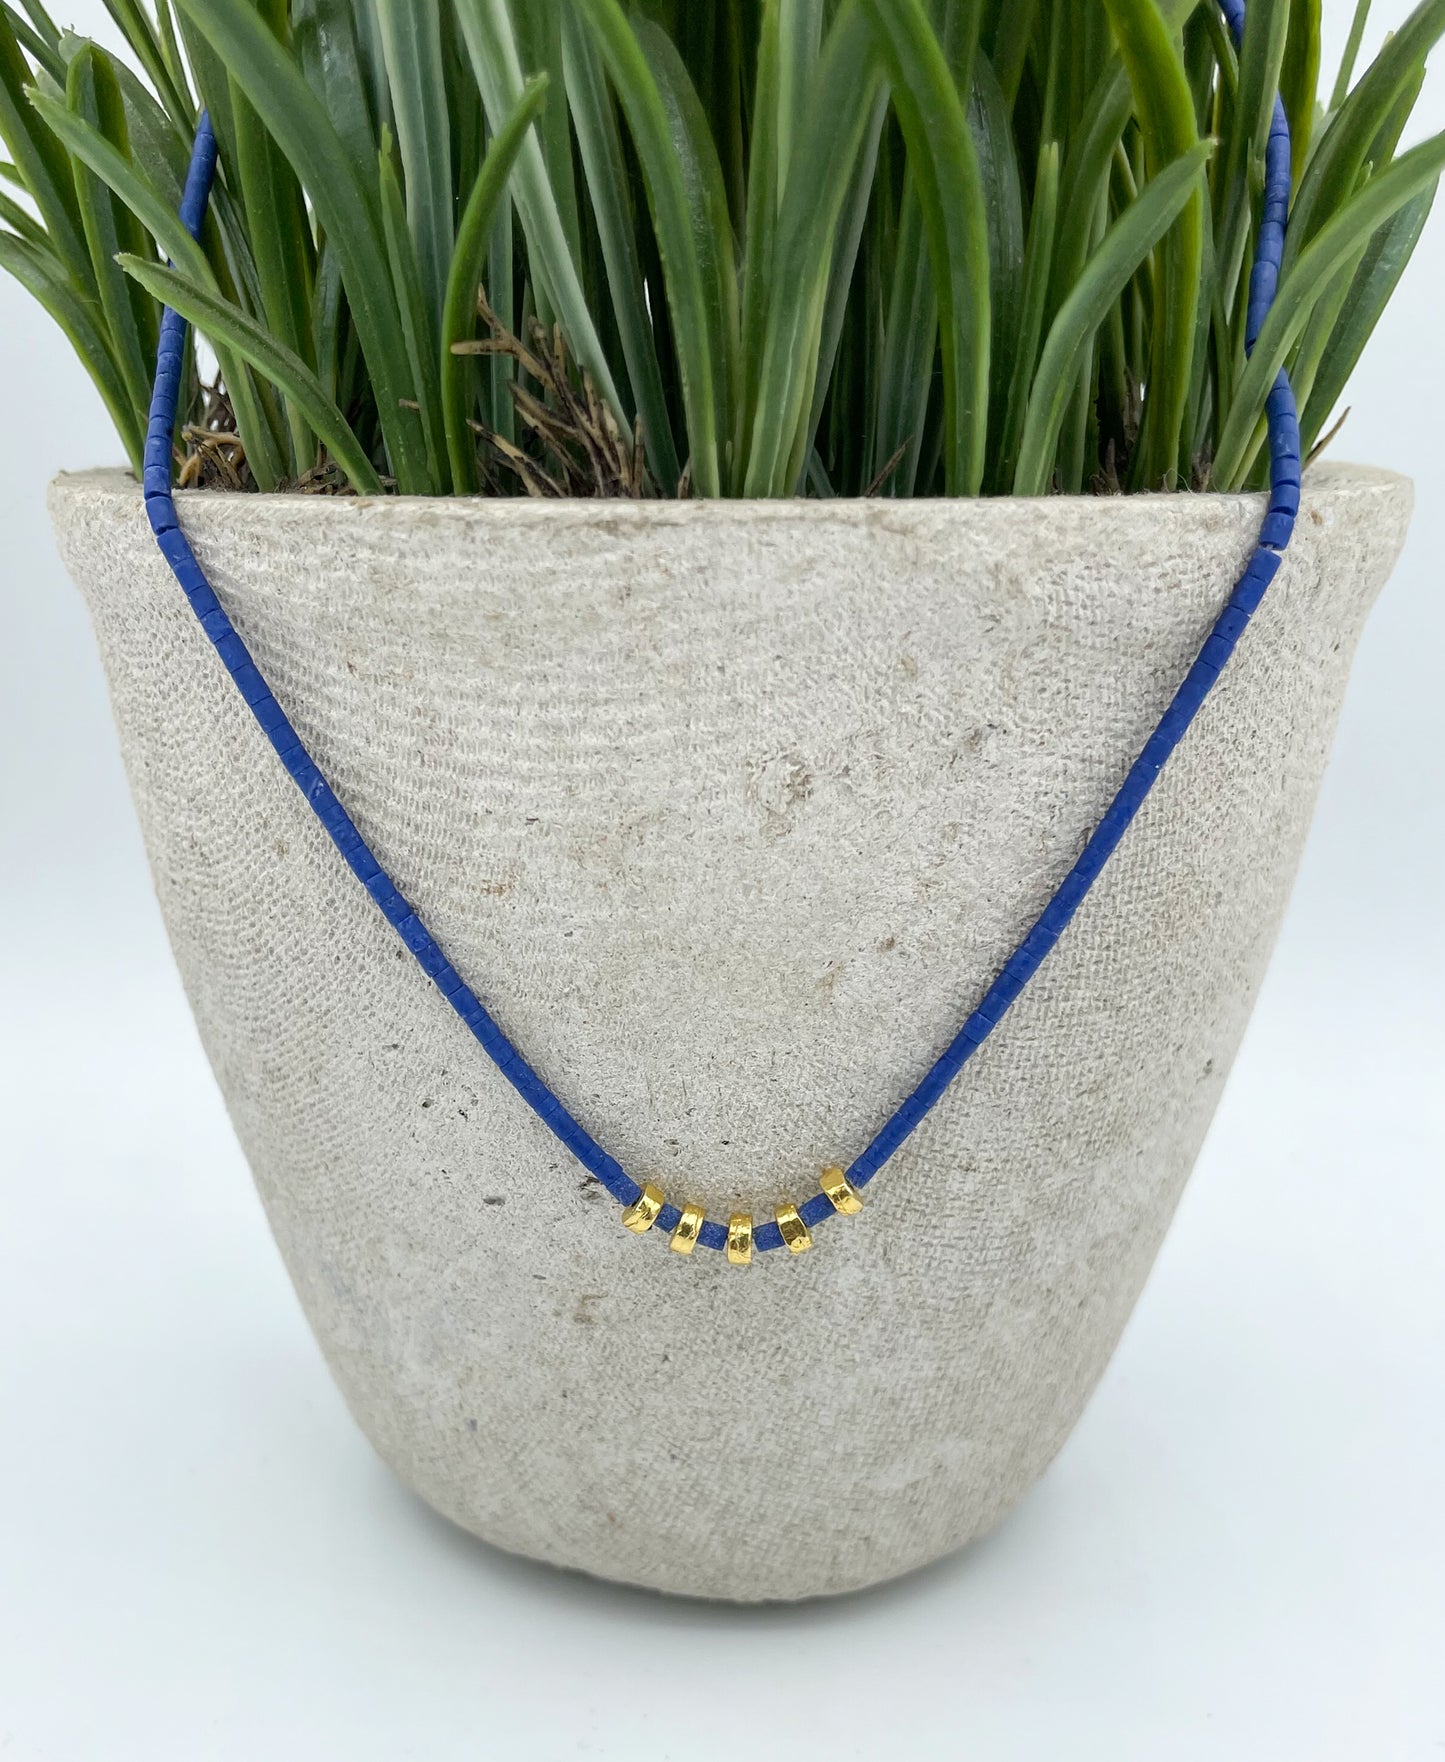 Lapis necklace with hammered gold spacers